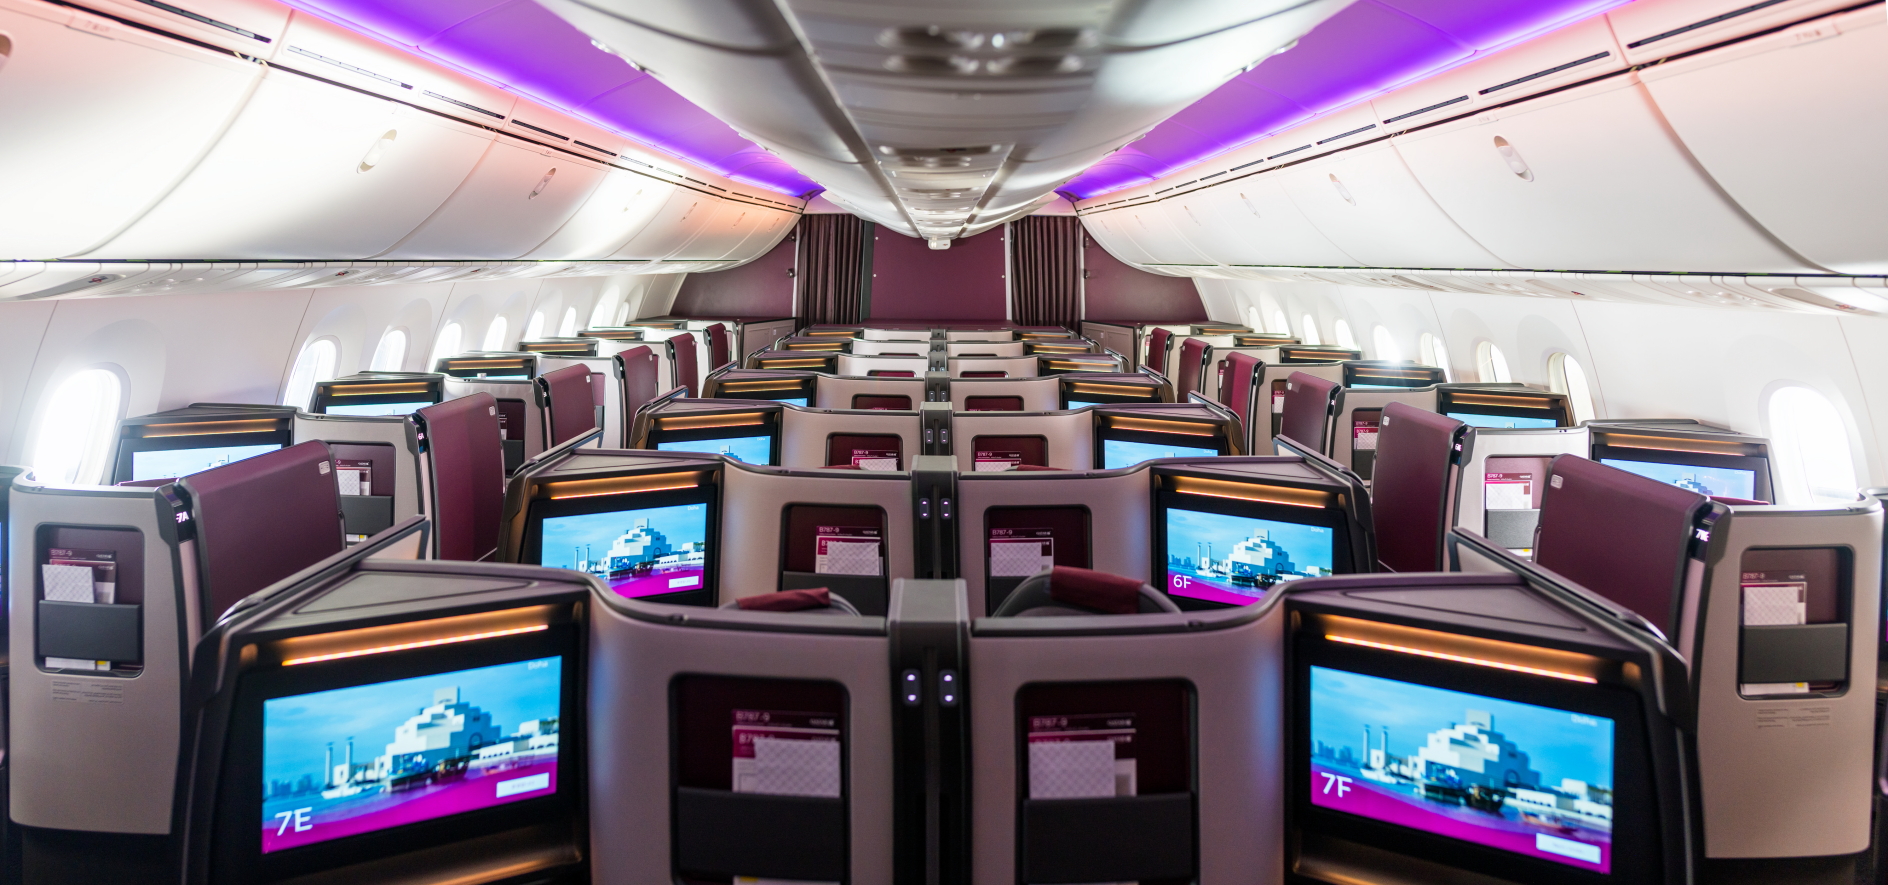 Qatar Airways' new Adient Ascent Business Class Suite is arranged in a herringbone pattern with a 1-2-1 configuration, each suite has direct aisle access with a sliding door. Passengers seated in adjoining centre suites can slide the privacy panels away at the touch of a button to create their very own space. Click to enlarge.